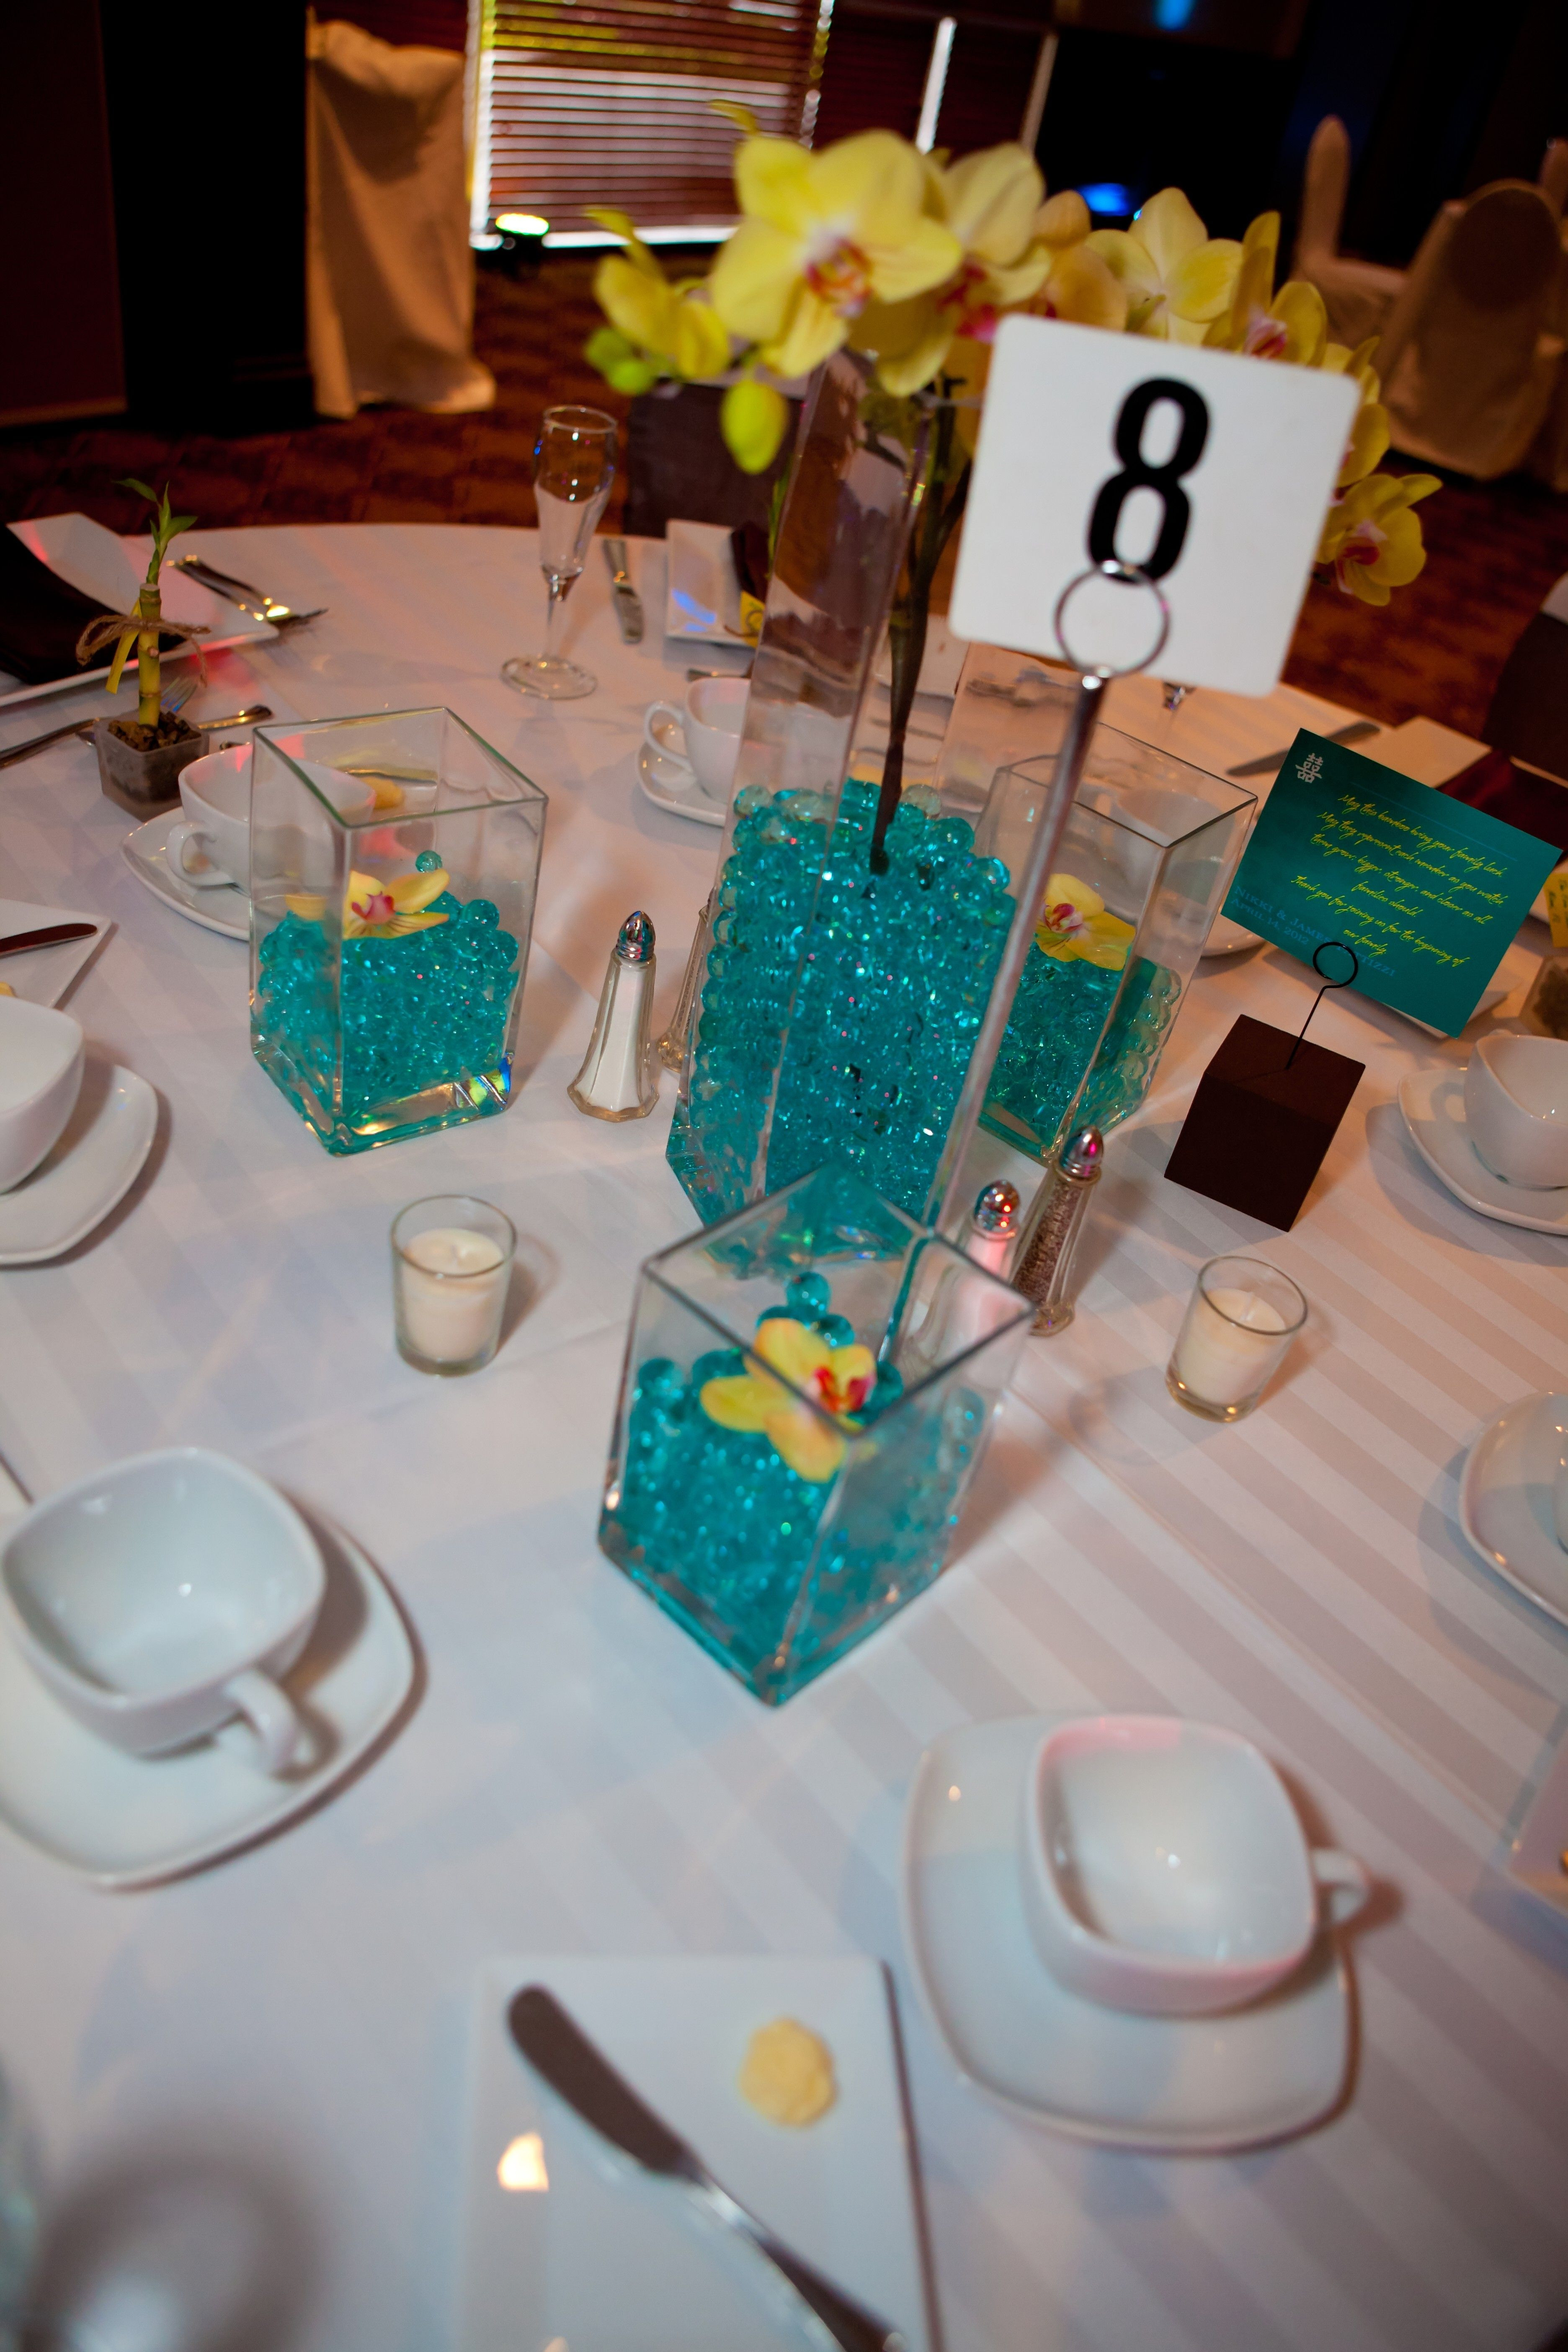 17 Lovely Dollar Store Square Vases 2024 free download dollar store square vases of wedding centerpieces square vases teal water beads yellow throughout square vases teal water beads yellow orchids candles